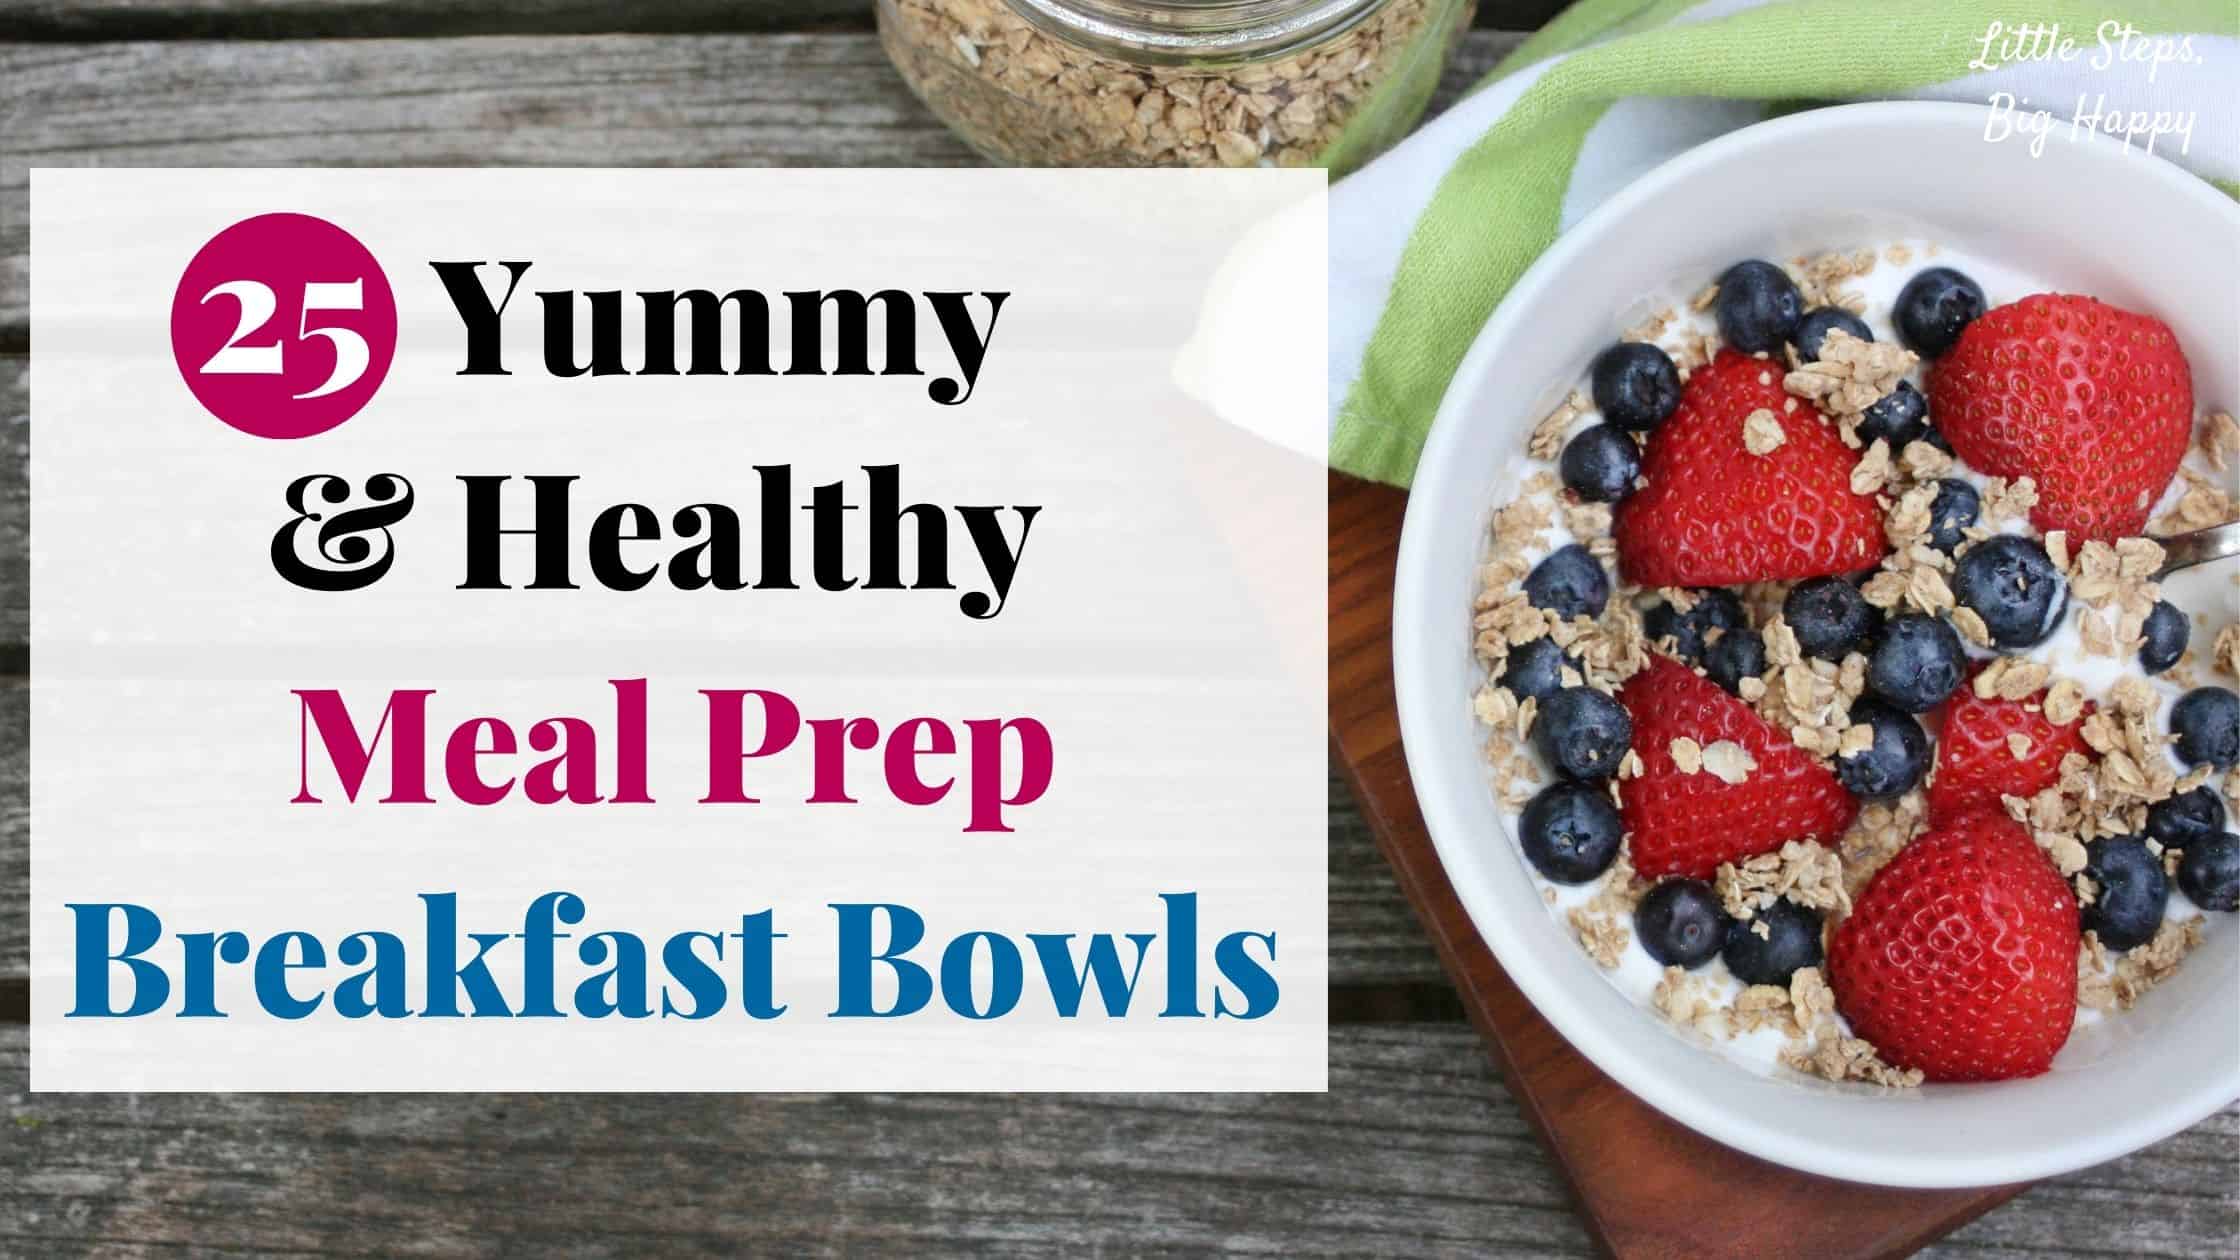 25 Yummy and Healthy meal Prep Breakfast Bowls